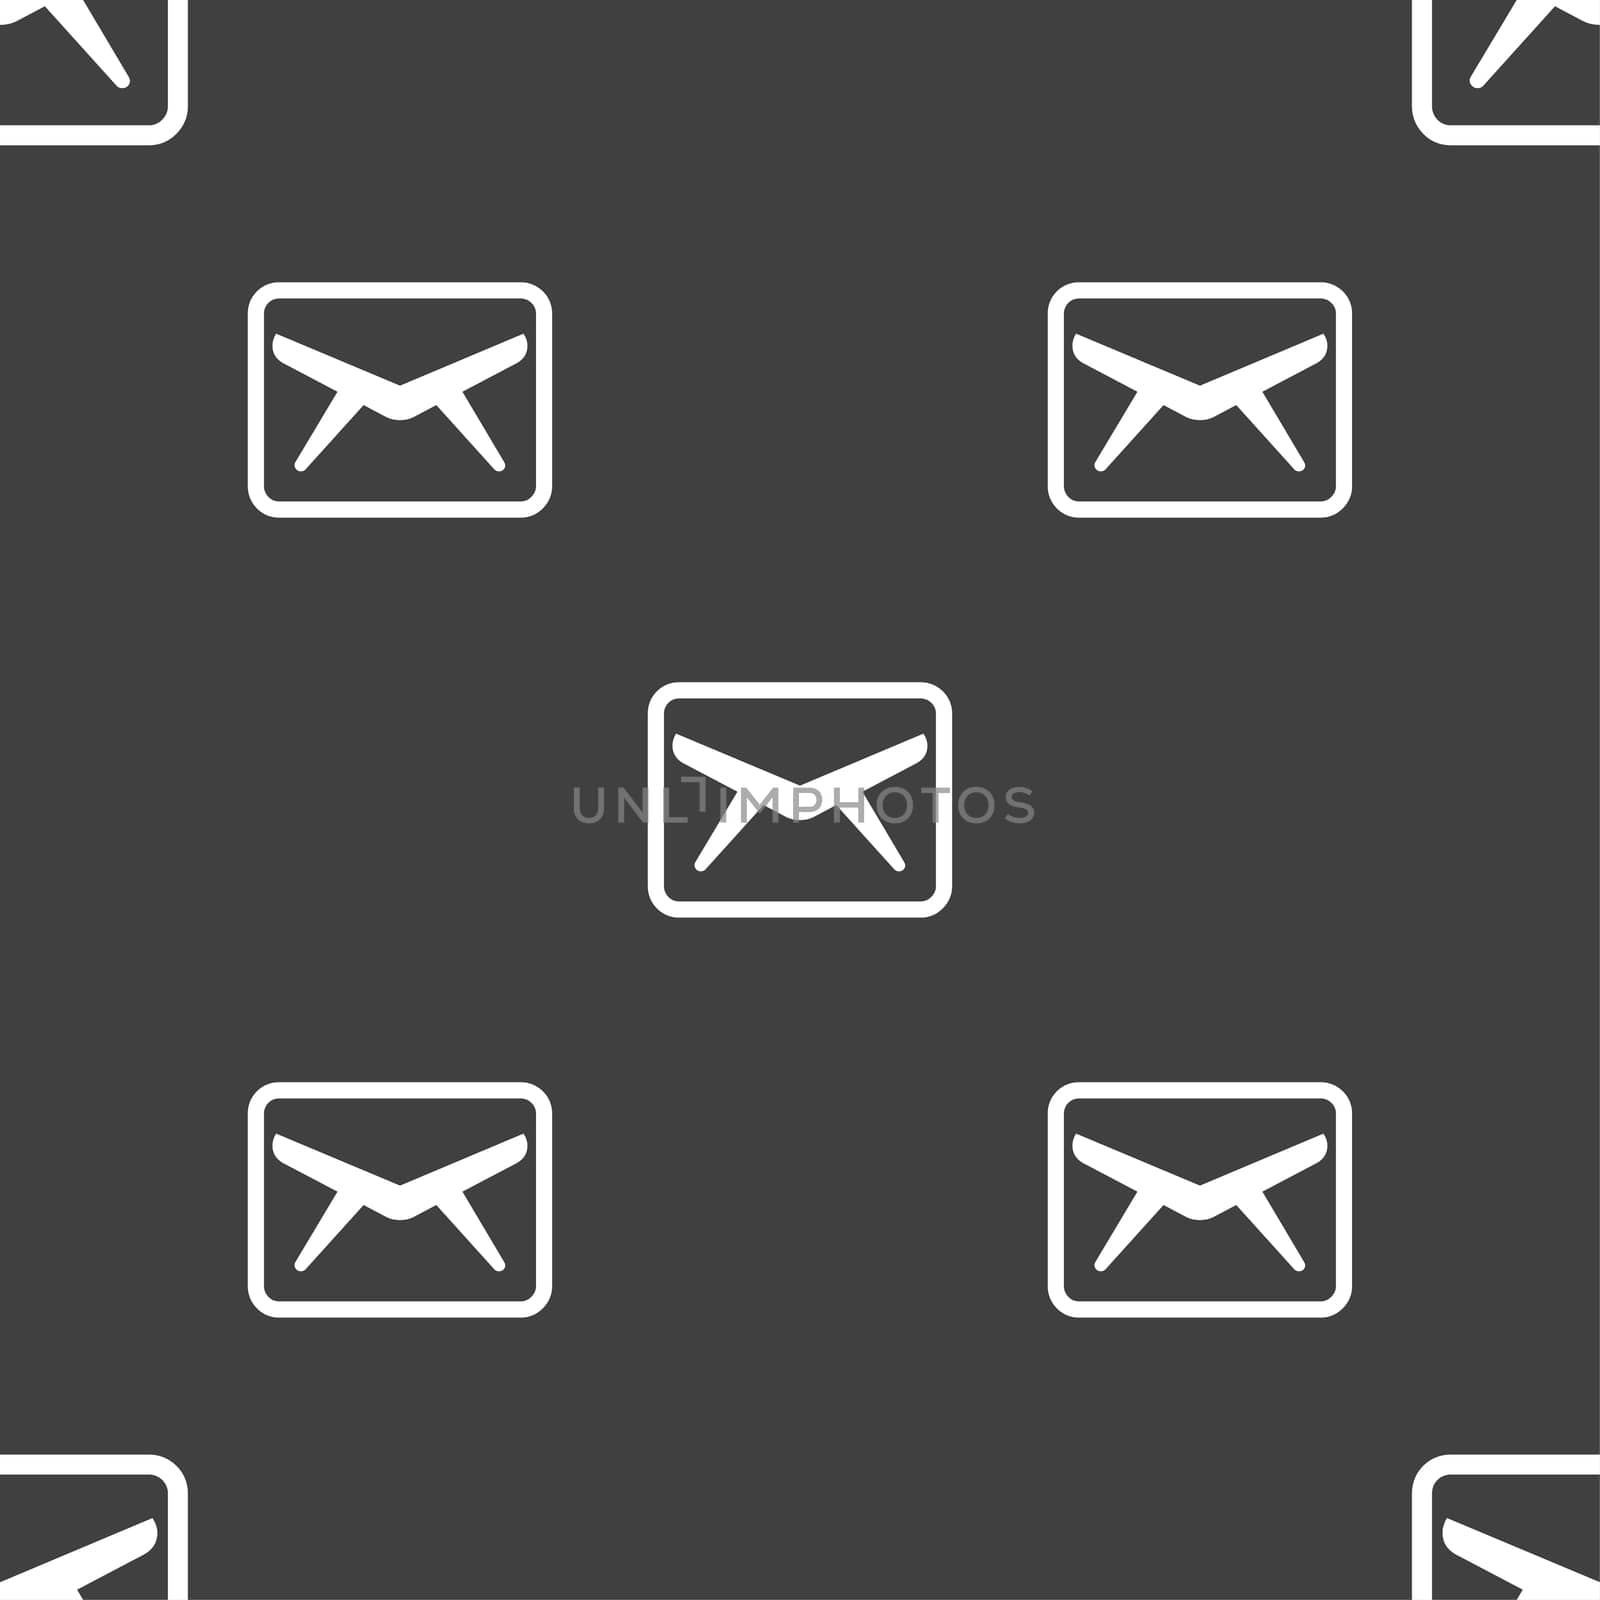 Mail, Envelope, Message icon sign. Seamless pattern on a gray background. illustration